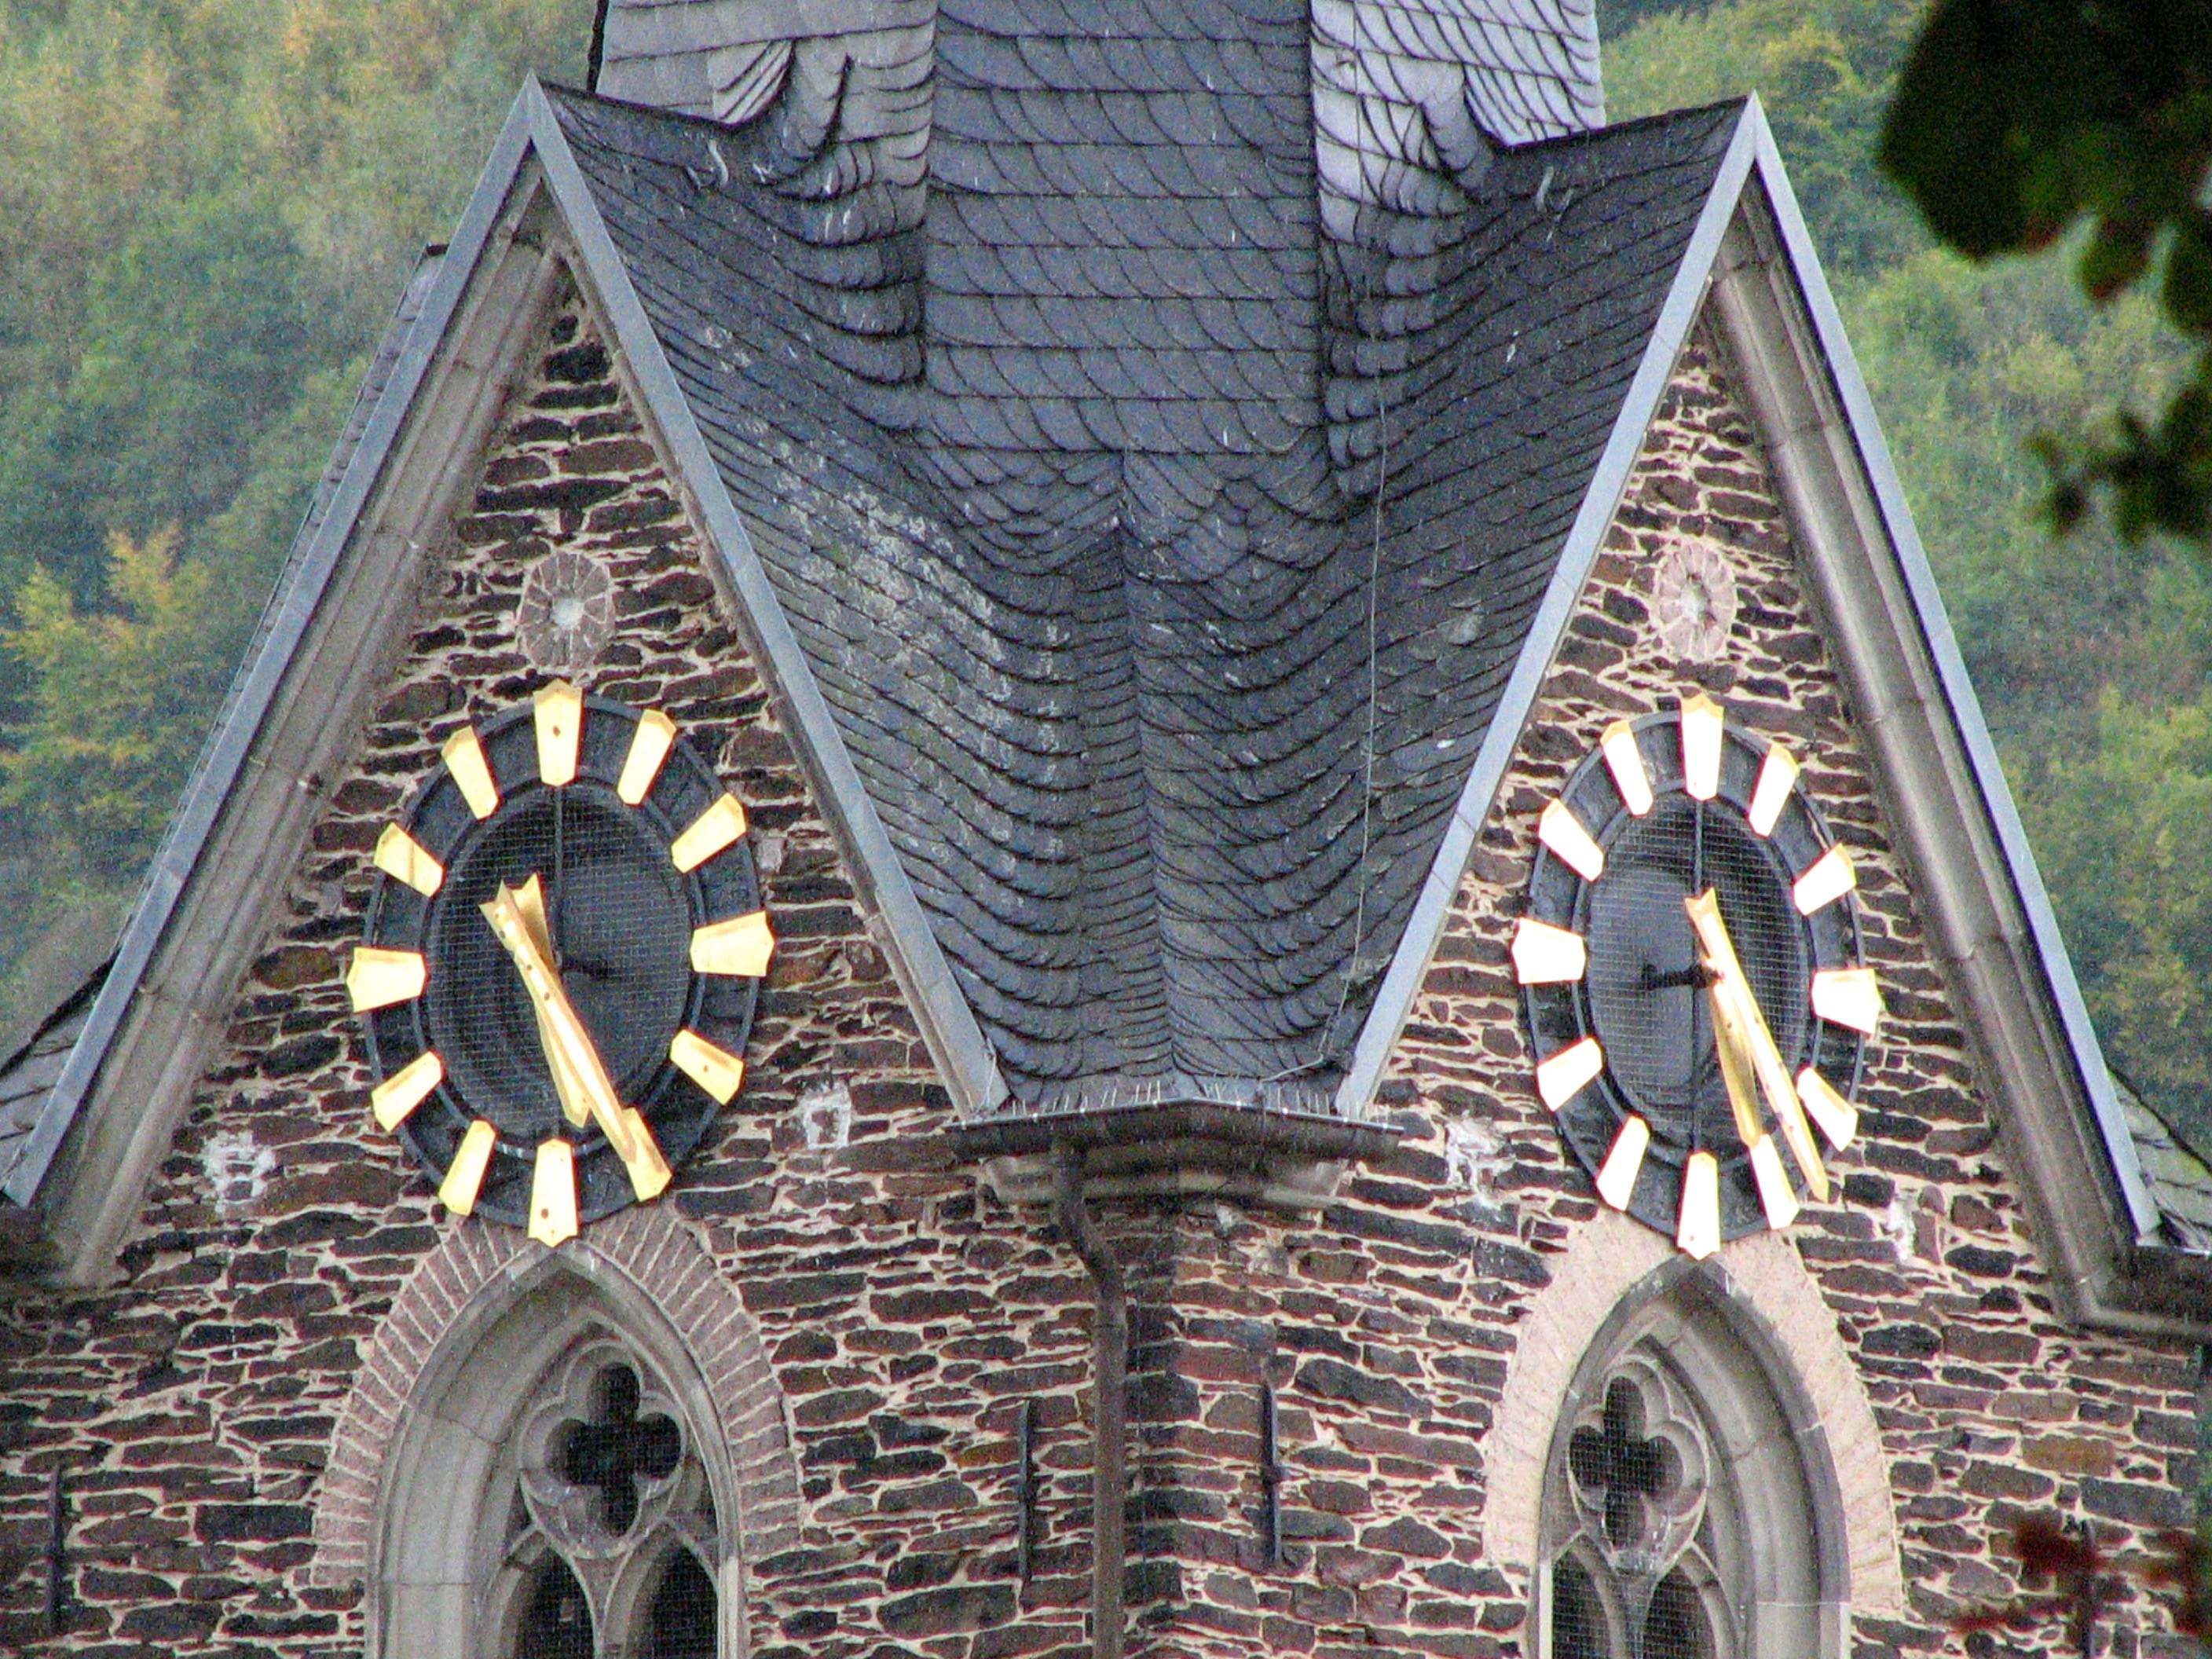 brown brick and gray roofed clock tower